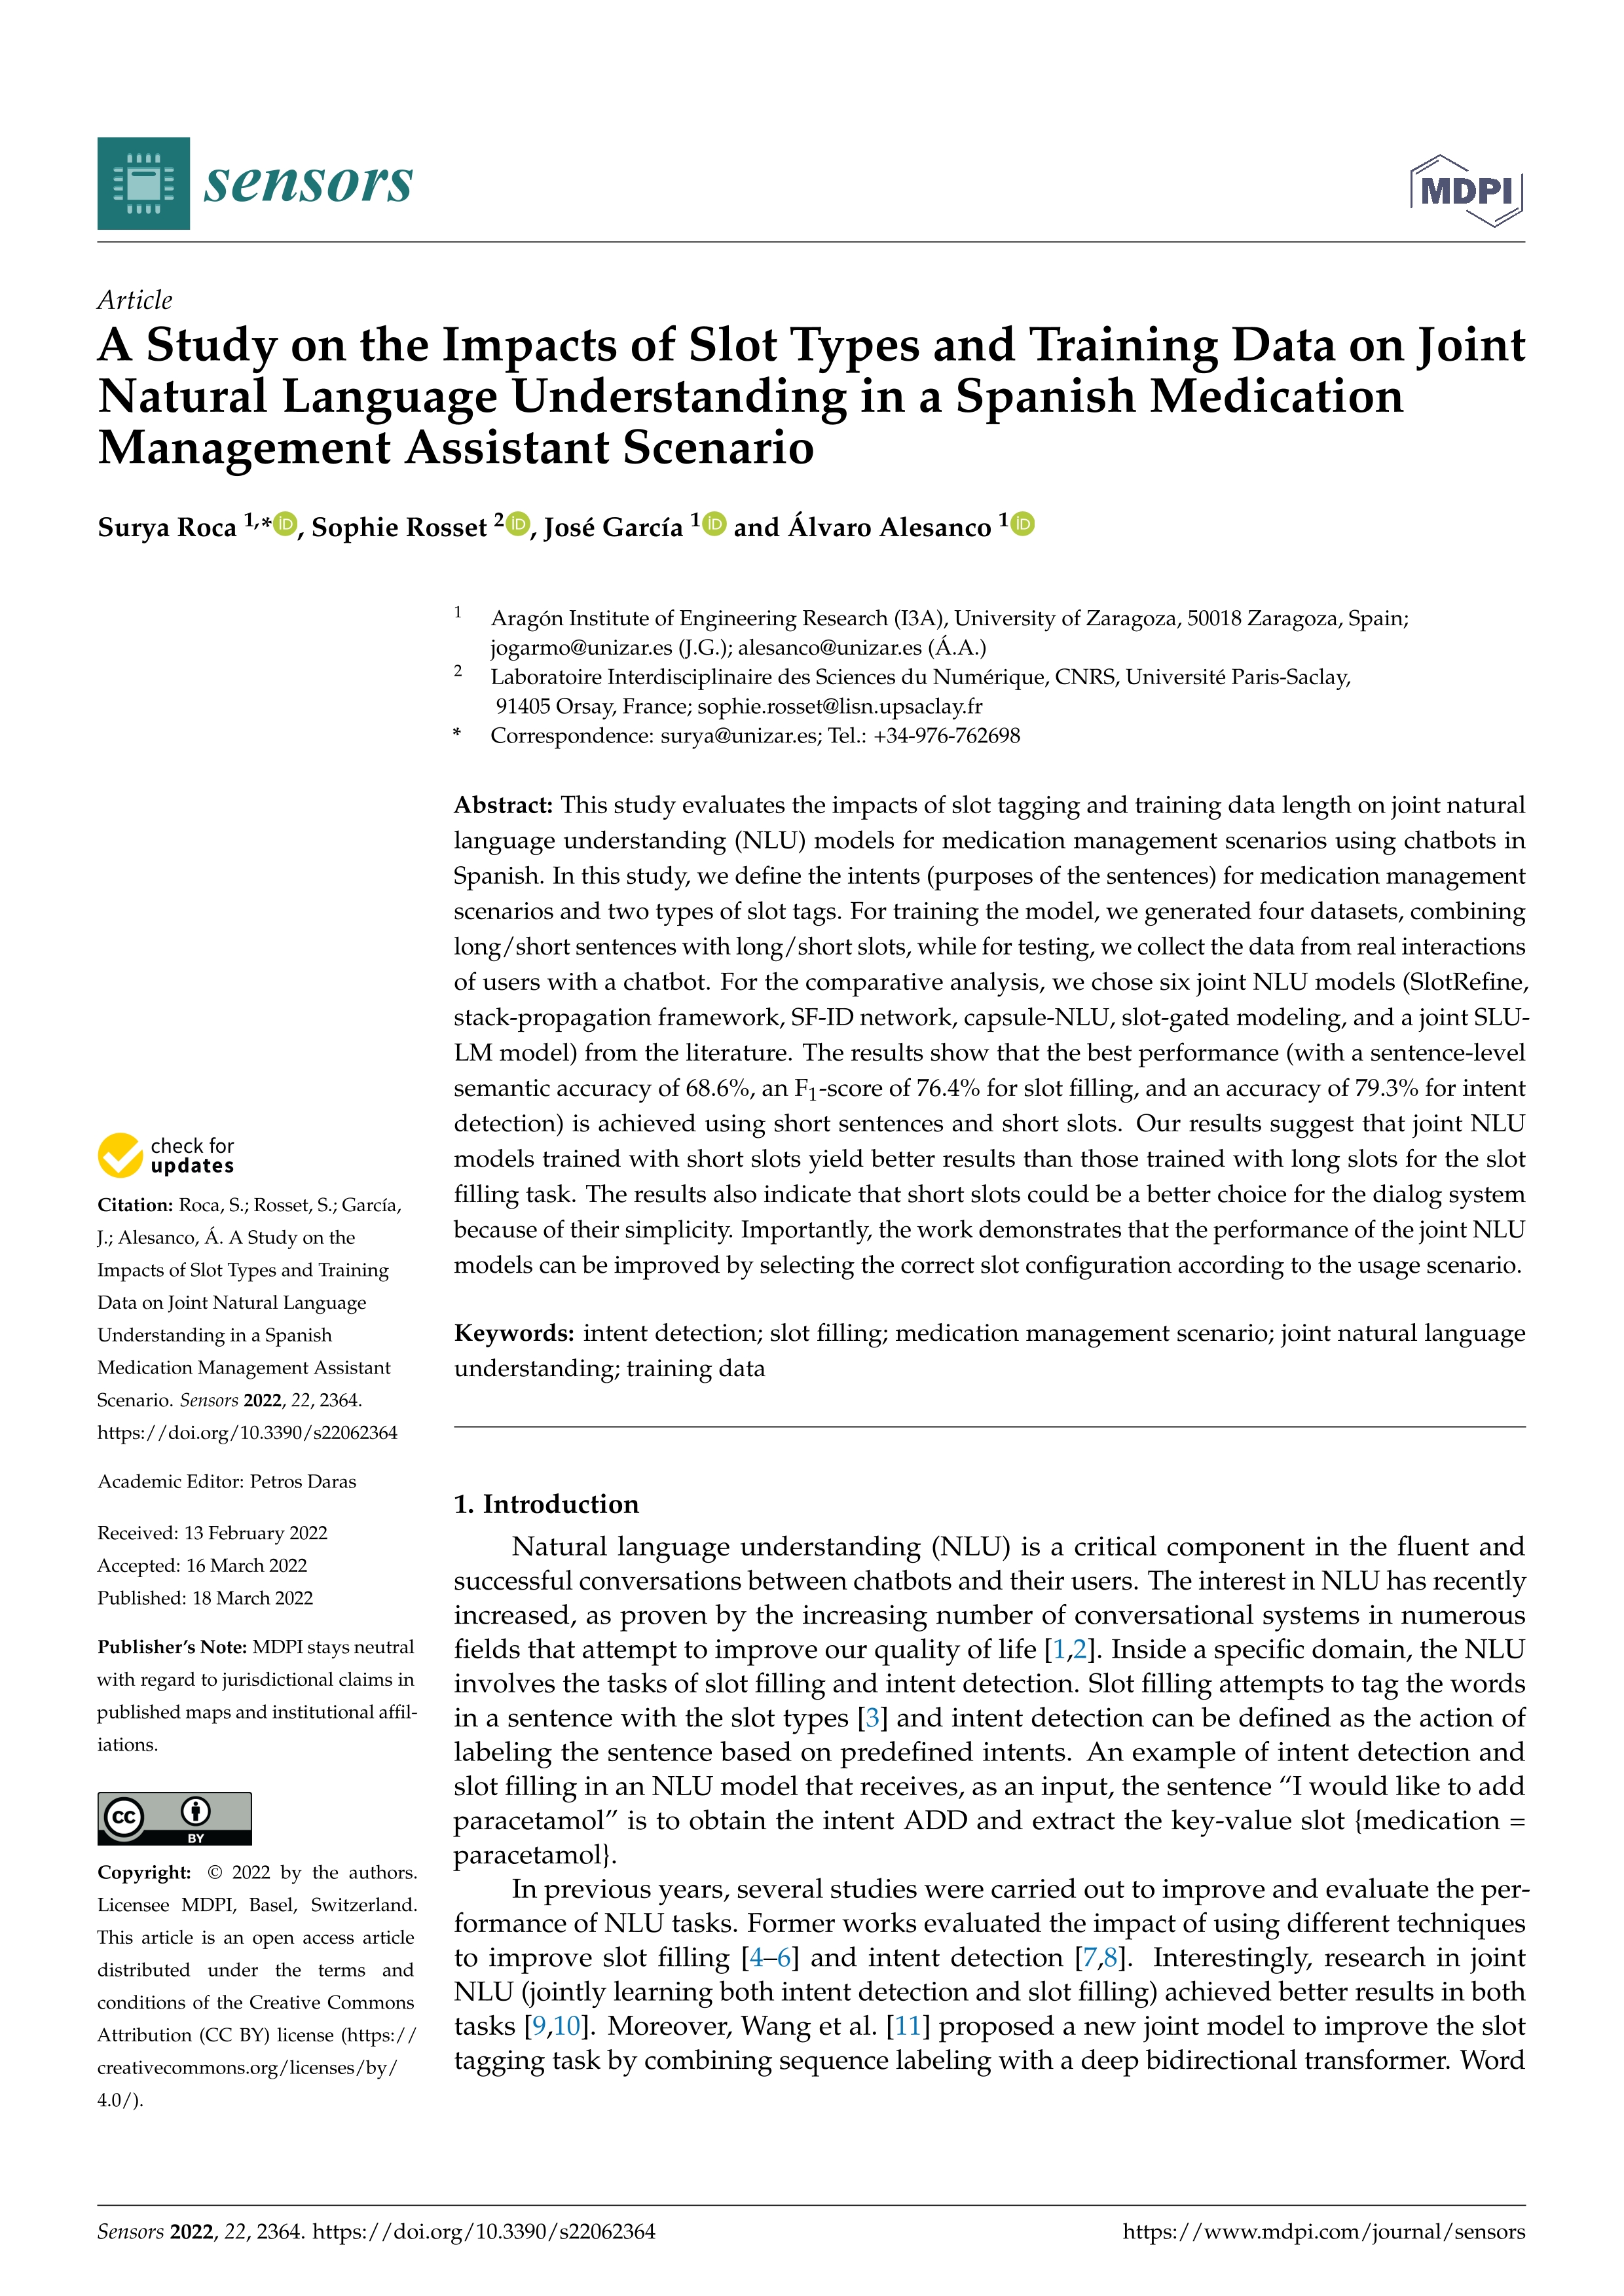 A Study on the Impacts of Slot Types and Training Data on Joint Natural Language Understanding in a Spanish Medication Management Assistant Scenario